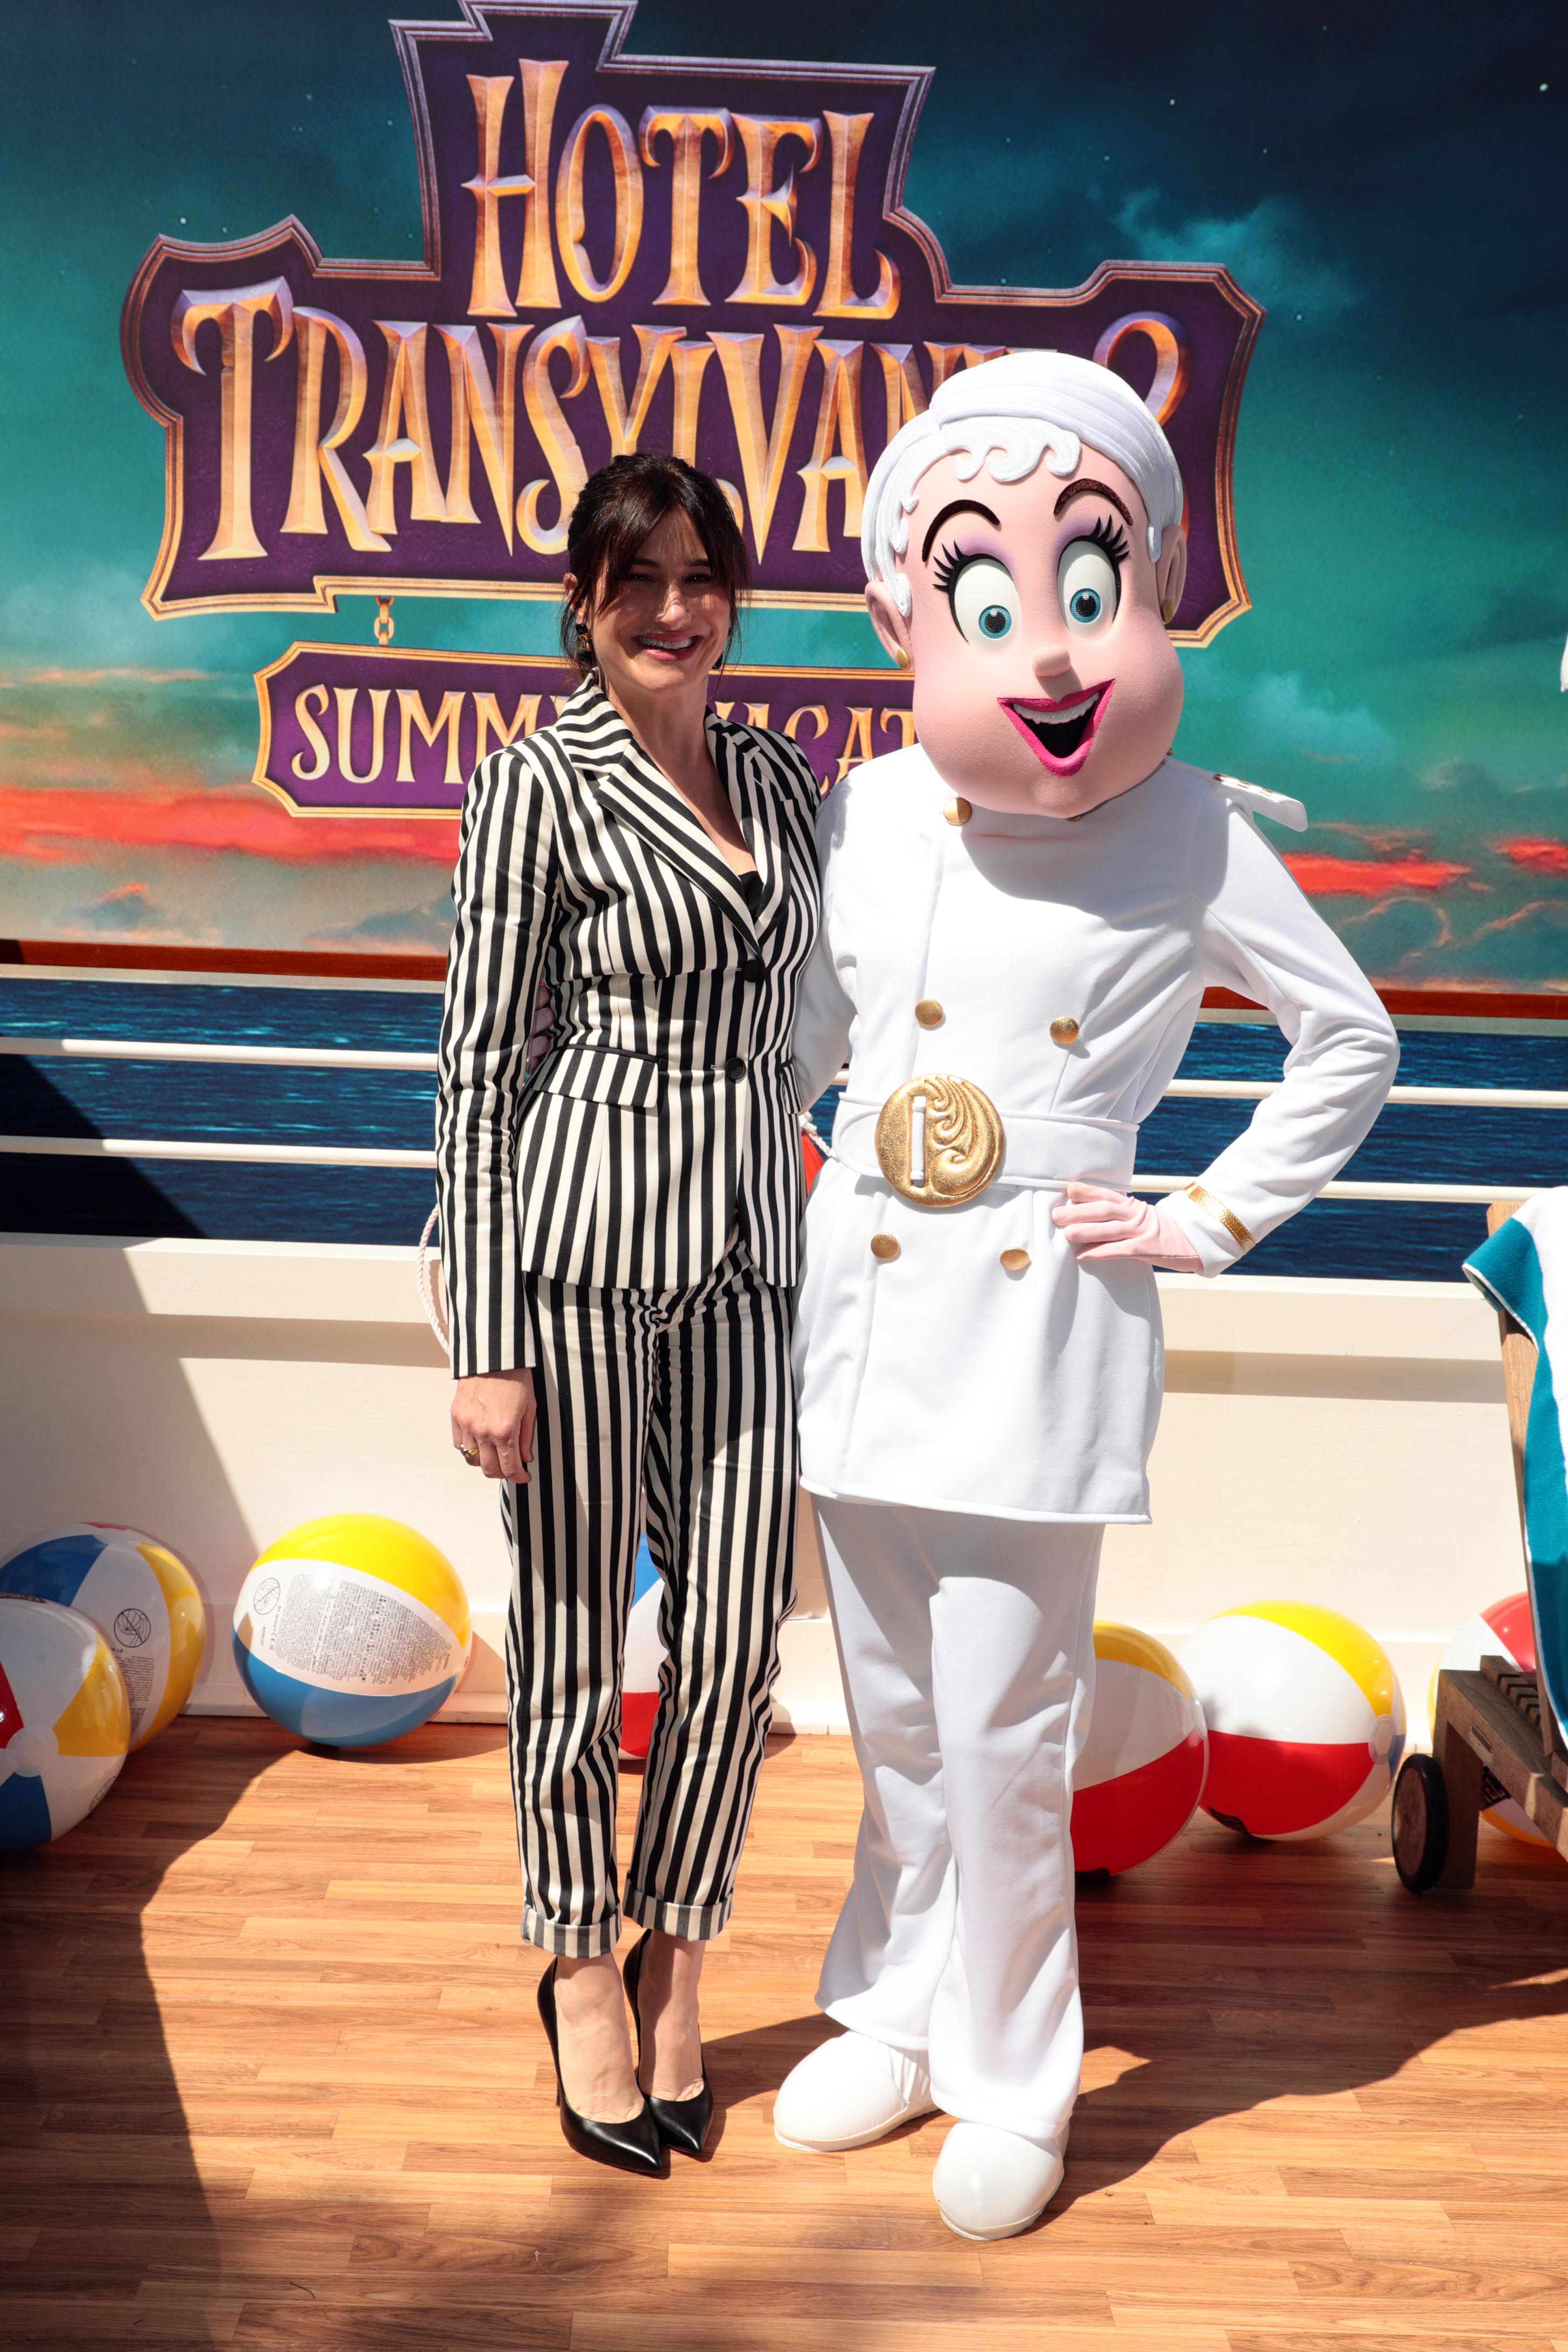 HOTEL TRANSYLVANIA 3: SUMMER VACATION Photo Call at Sony Pictures Animation's Press Day, Culver City, USA - 11 April 2018